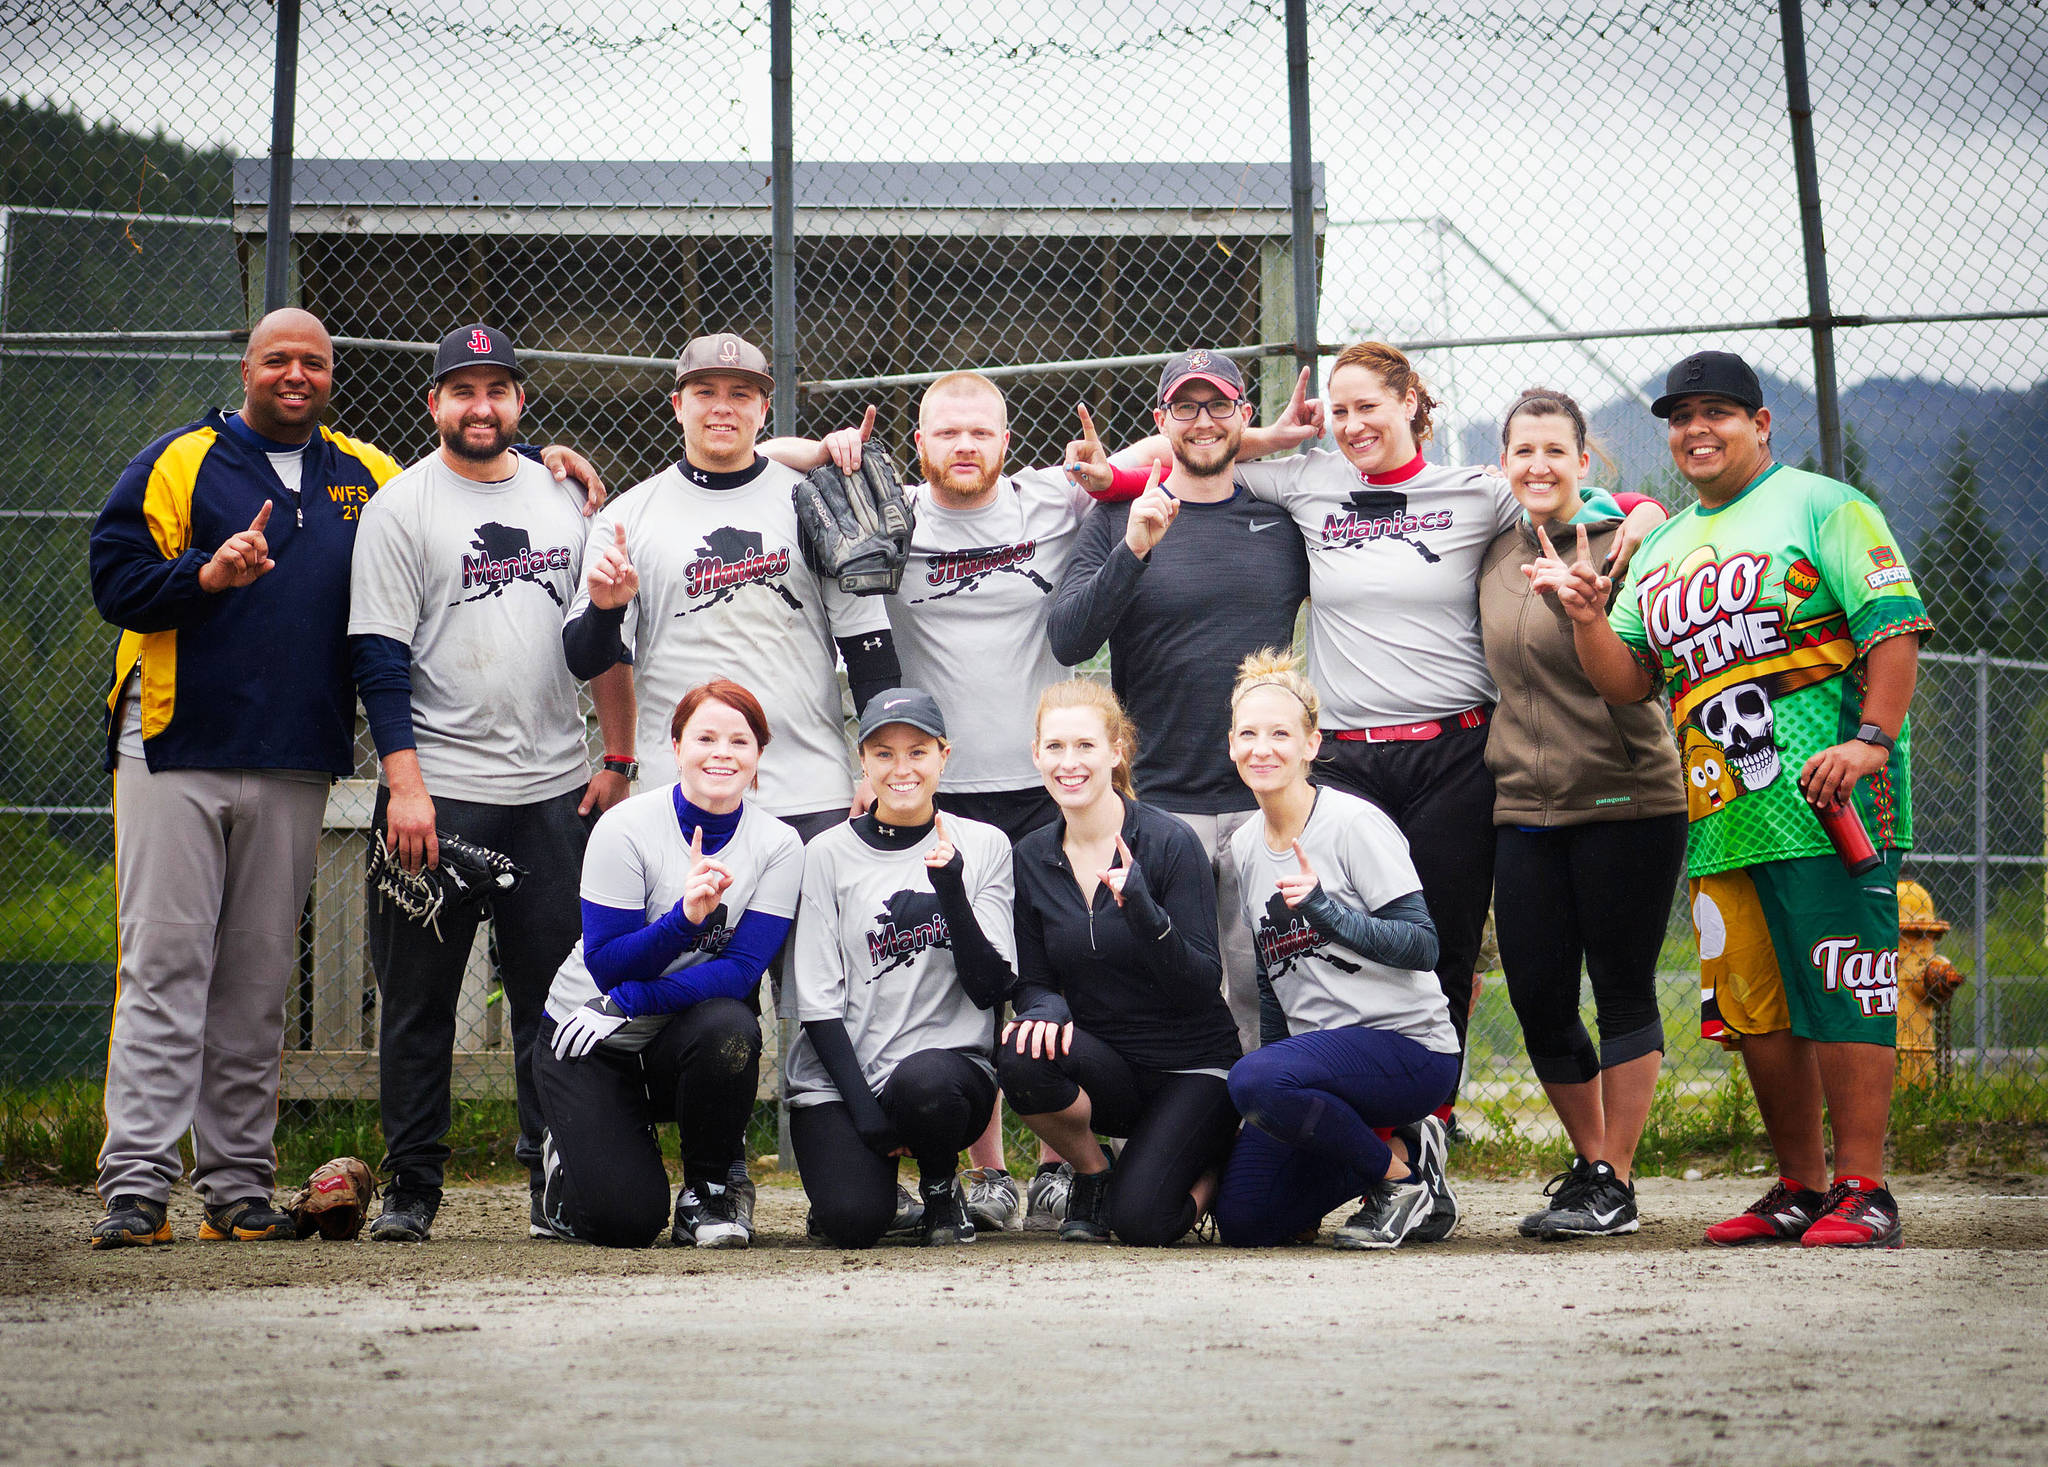 Maniacs (pictured) took first in the upper division of the Capital City Coed Softball Tournament over the weekend. The Viking Lounge was second, and the InterShelter D’Lunatics were third. (Courtesy Photo | Katie Damian)